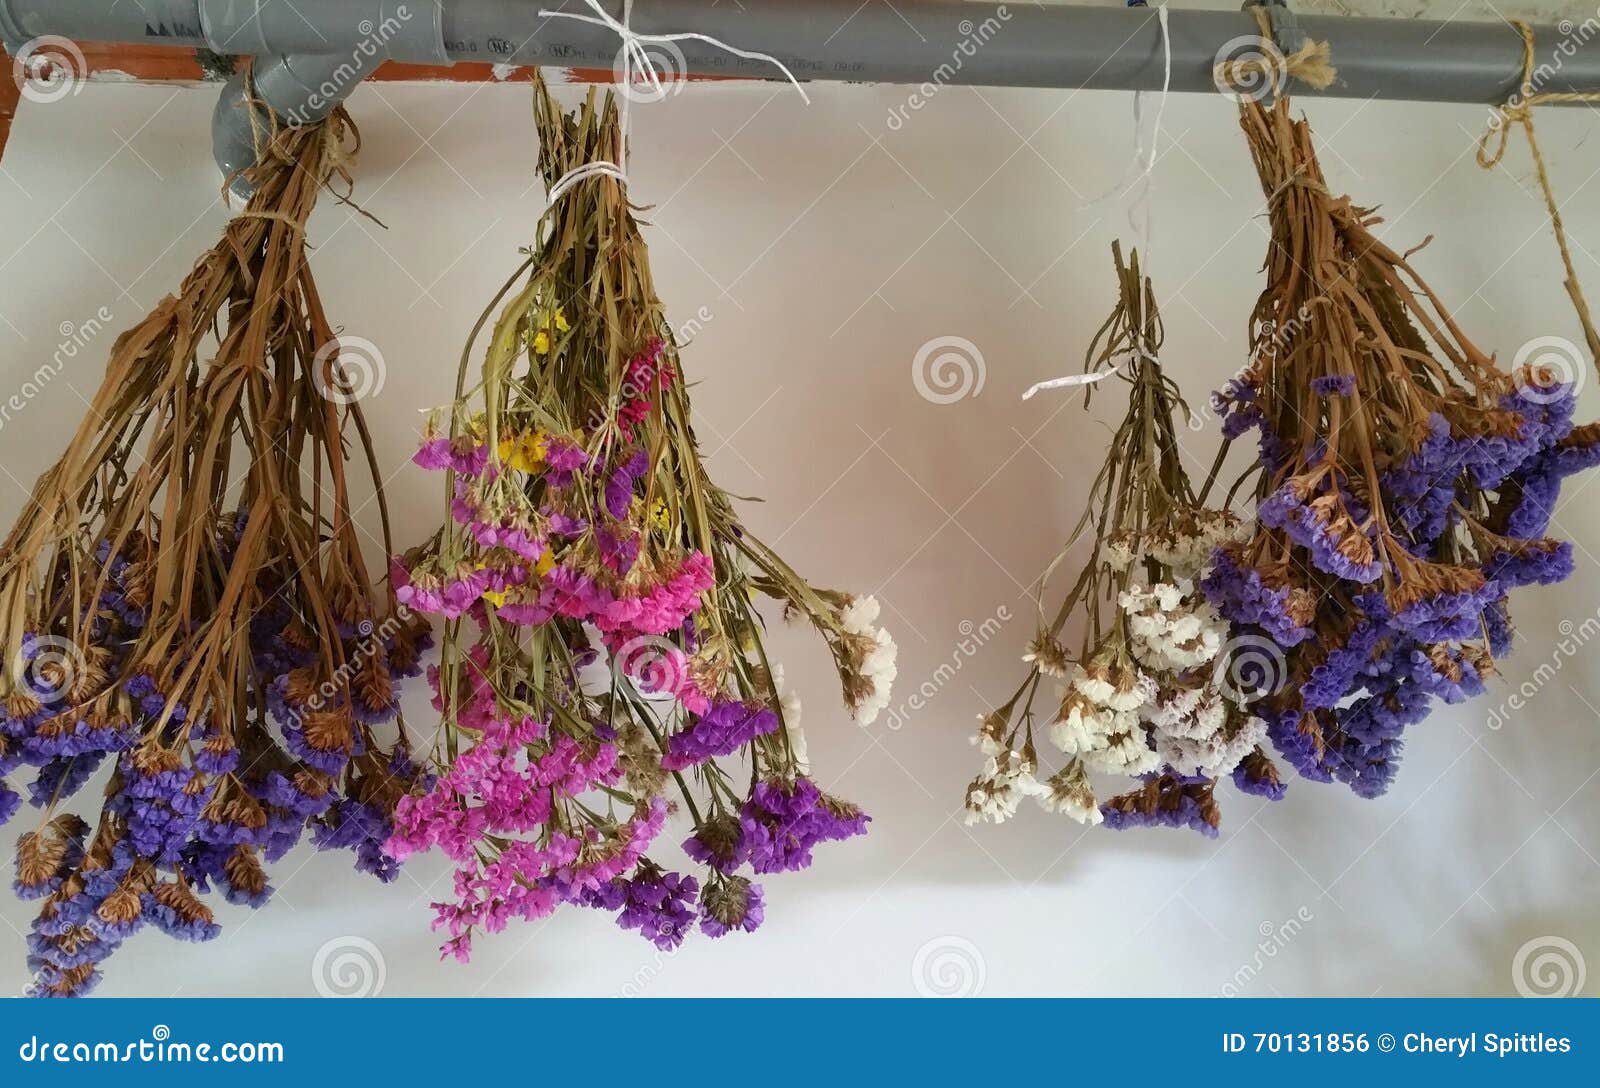 Bunches Of Statice Flowers Hanging To Dry Stock Photo ...